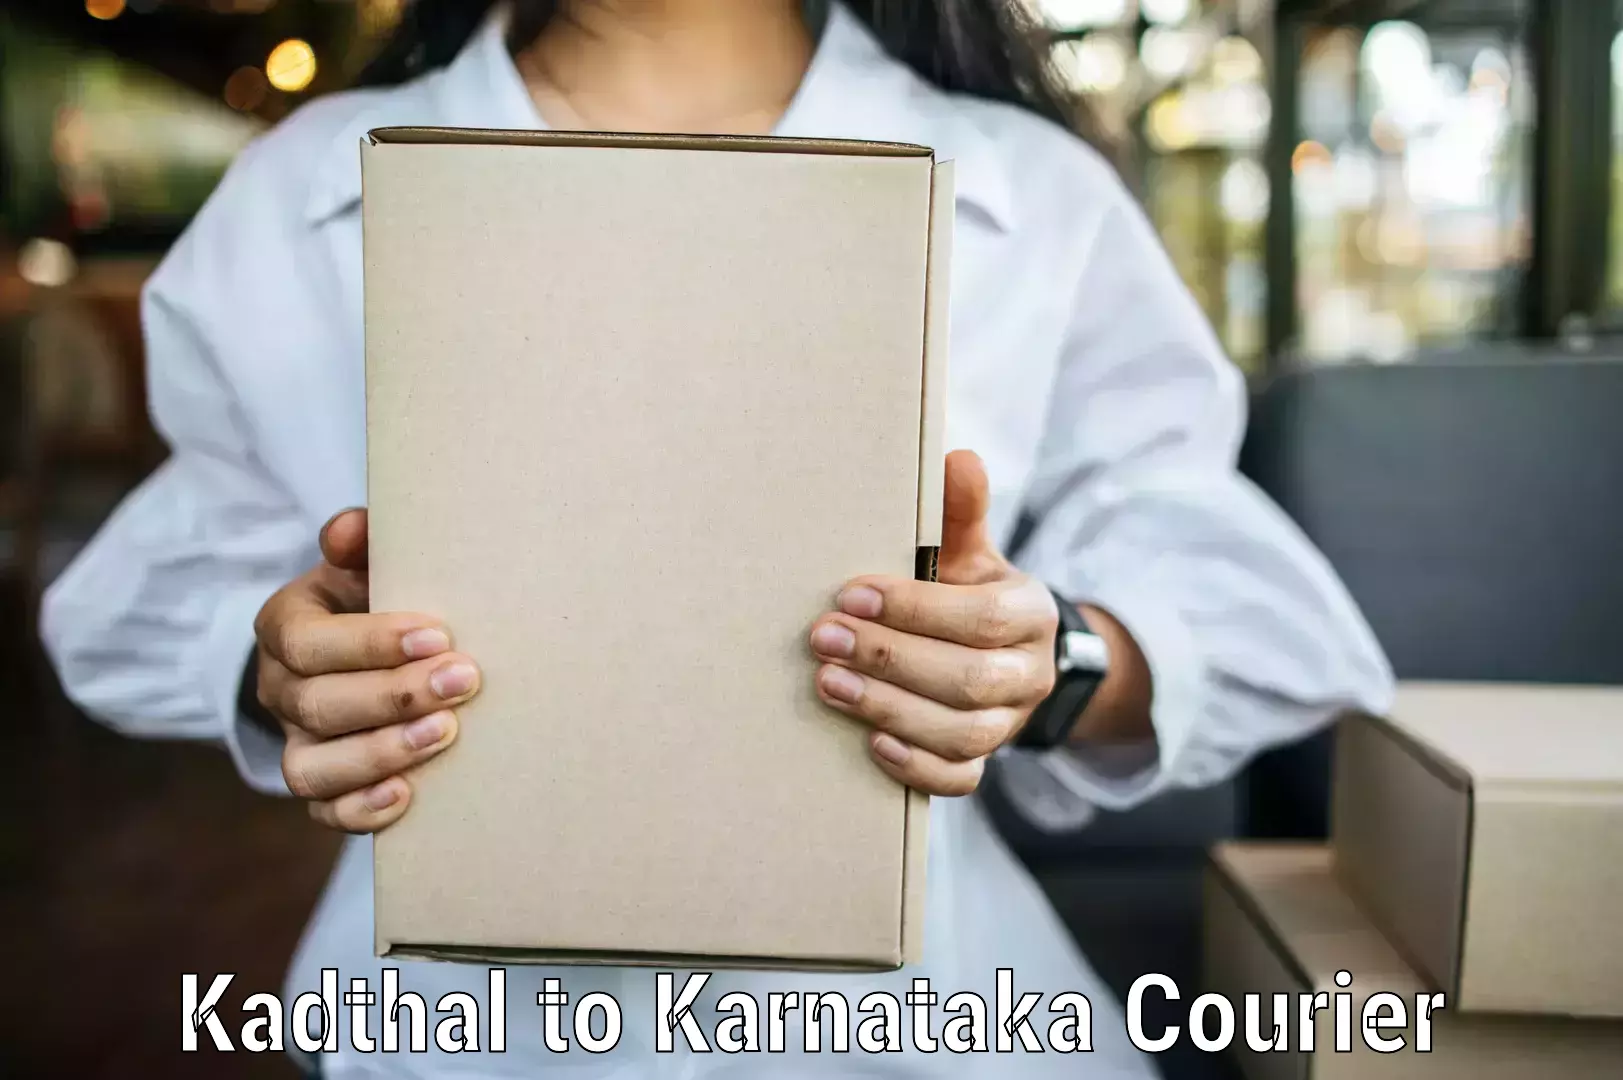 Nationwide courier service Kadthal to Thirthahalli